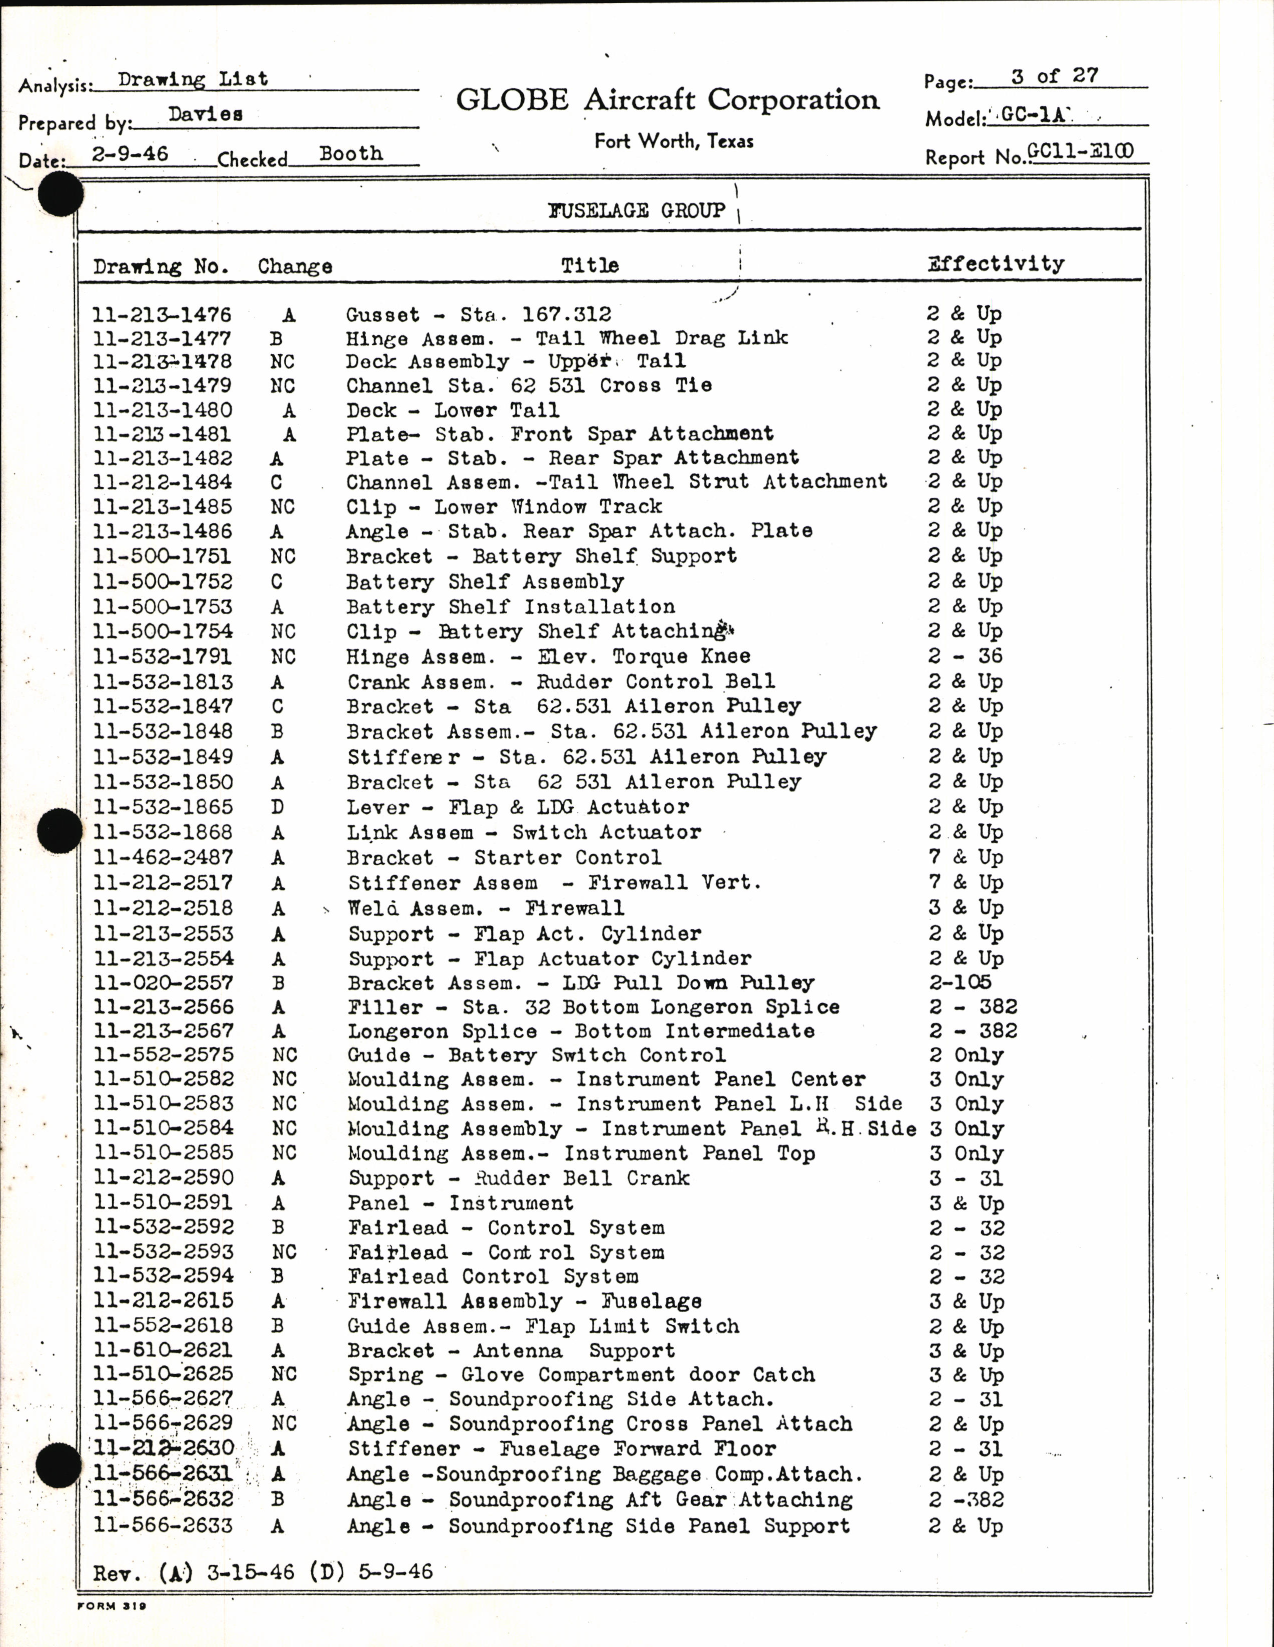 Sample page 6 from AirCorps Library document: Globe Drawing List